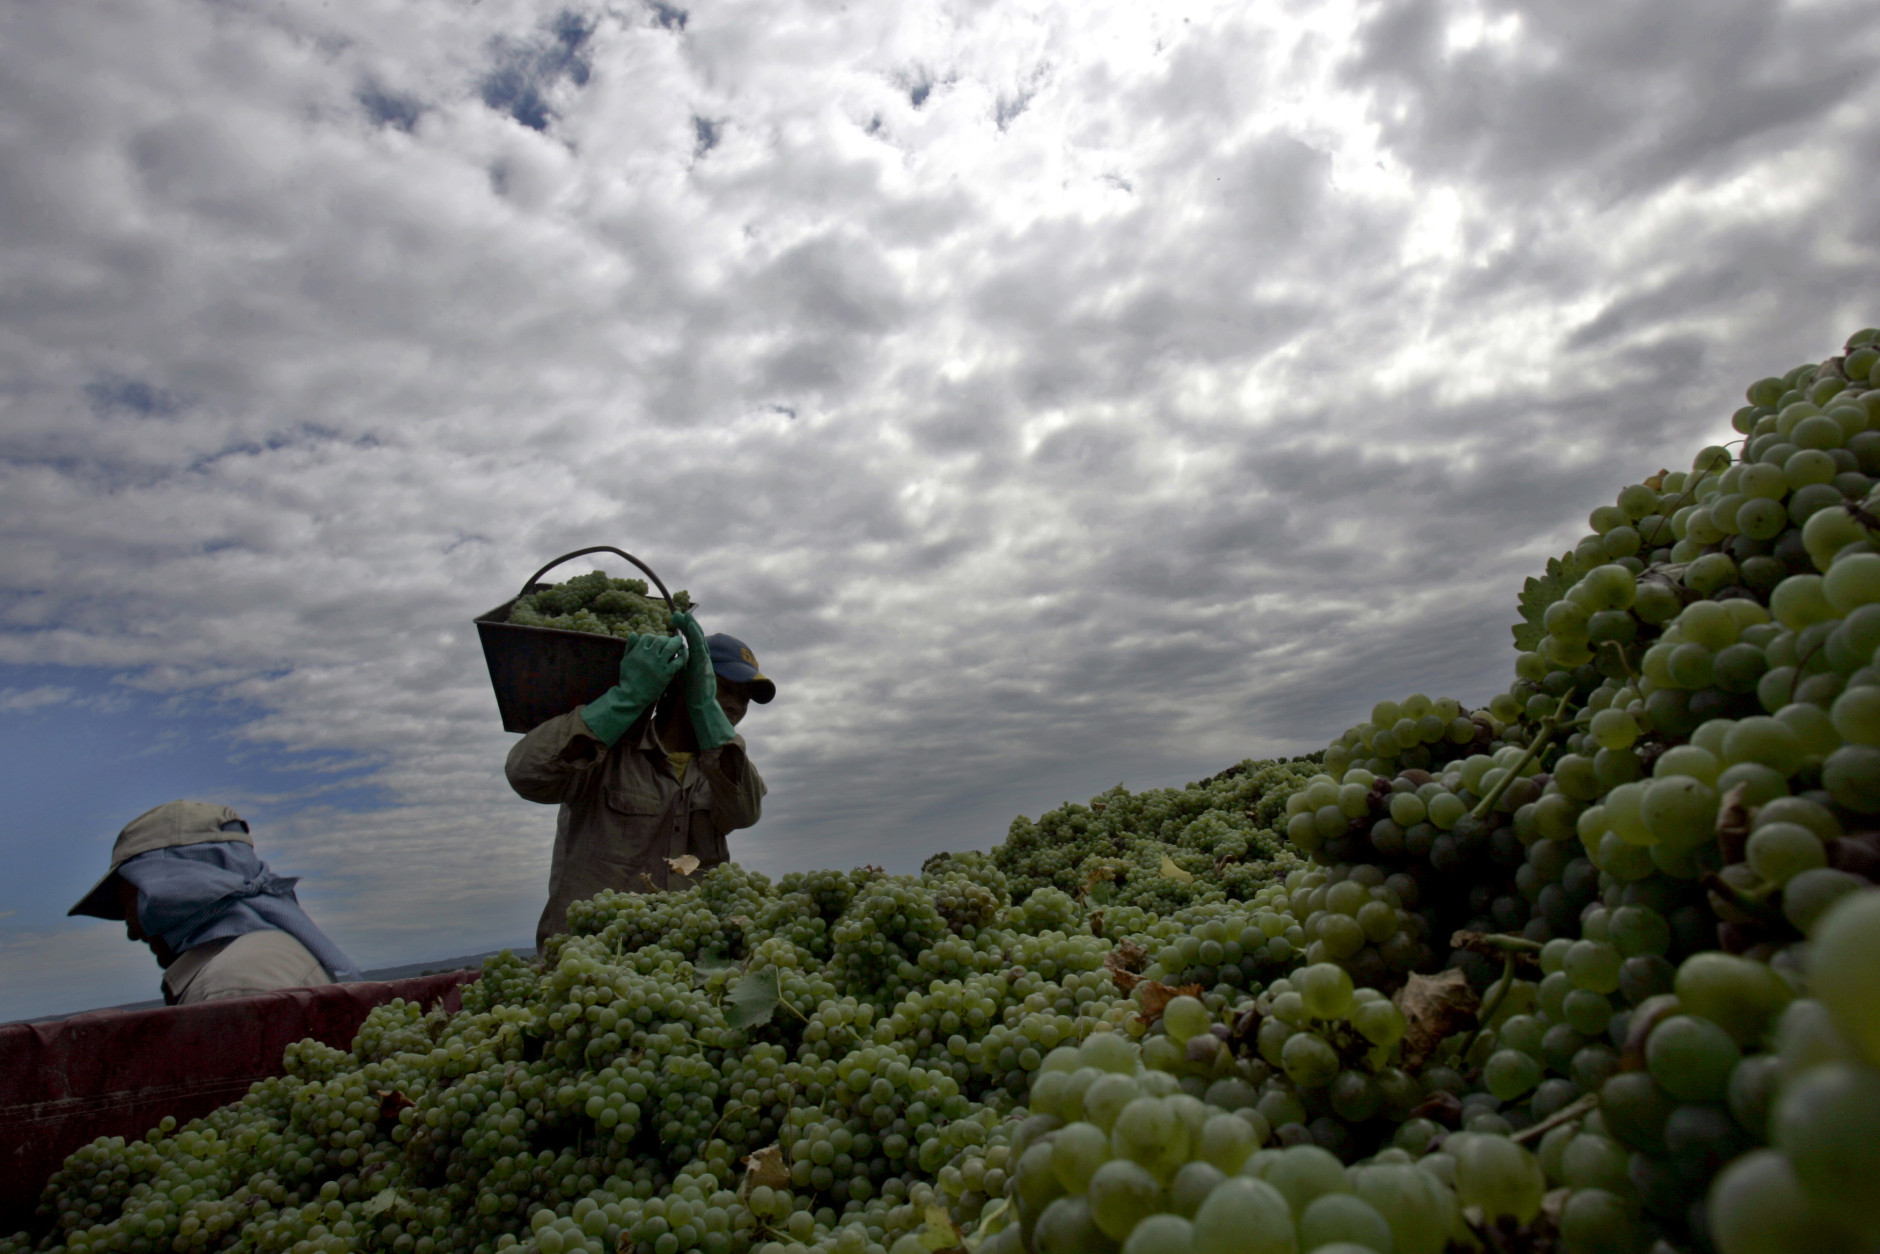 Workers carry fresh grapes to farm trucks in Mendoza, some 1000 kilometers (640 miles) west of Buenos Aires, Argentina, Thursday, Feb. 23, 2006. Argentina's grapes are going global: the fifth-biggest wine producer in the world, clustered largely in leafy vineyards around the semi-arid western province of Mendoza, is cranking out wines to capture export markets. (AP Photo/Natacha Pisarenko)